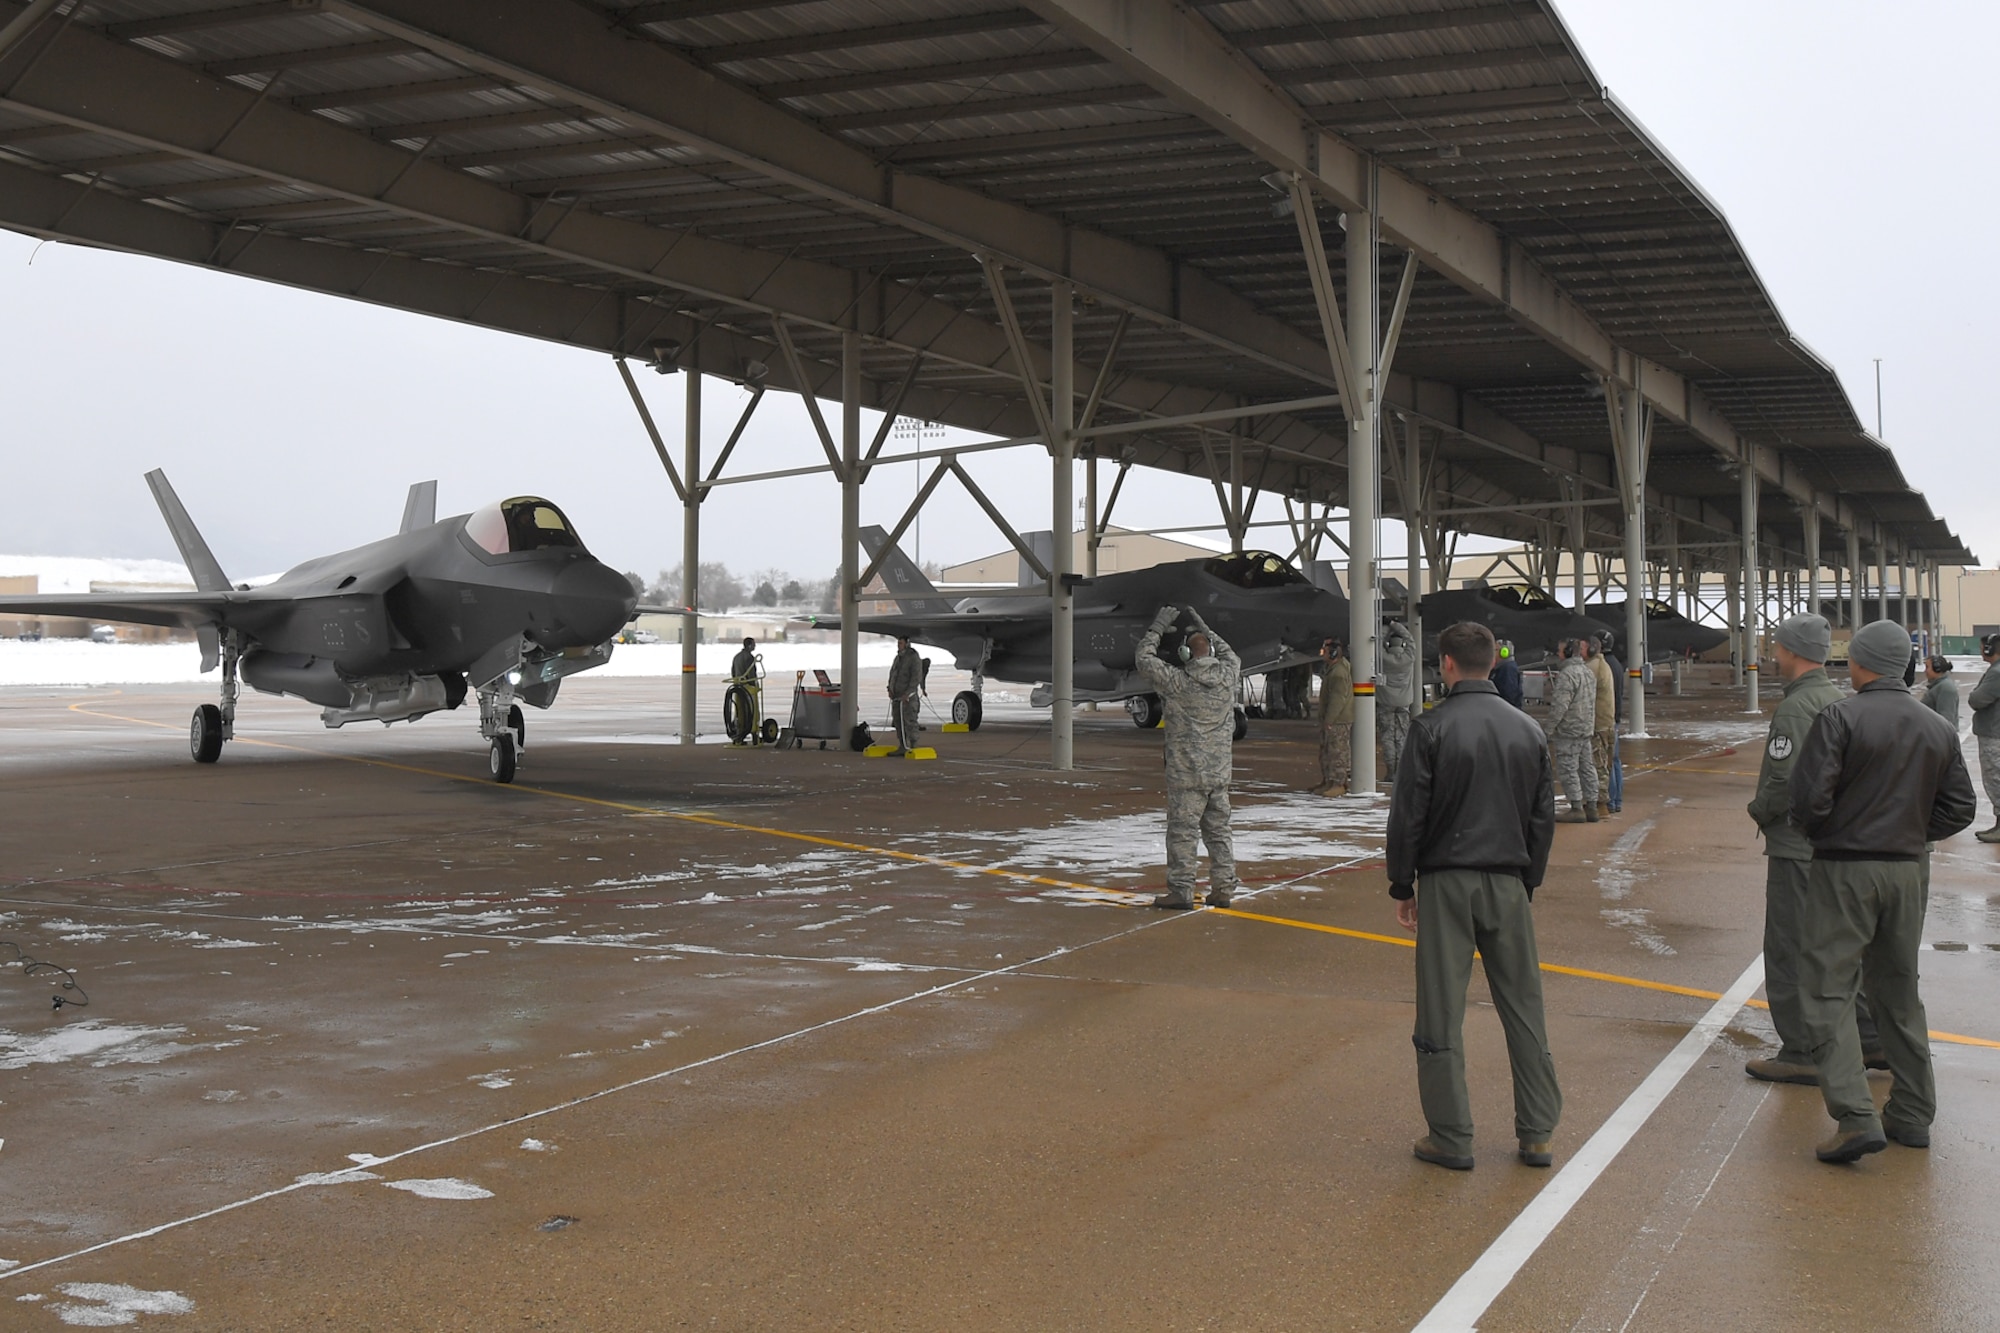 The 421st Fighter Squadron at Hill Air Force Base, Utah, received its first F-35A Lightning II Dec. 12. The squadron is the last of three squadrons in Hill’s 388th Fighter Wing to take possession of combat-ready aircraft, bringing the 388th Fighter Wing closer to full strength. Lt. Col. Richard Orzachowski, 421st FS commander and 1st Lt. Ryan Allen, the squadron's youngest wingman, flew the jets from the Lockheed Martin plant in Fort Worth, Texas into a snow-covered Hill AFB. The arrival of the first jets in the 421st brings the total number of F-35As at Hill to 52 and is a big step toward the 388th Fighter Wing having a full complement of 78 F-35A Lightning IIs by the end of 2019. (U.S. Air Force photo by Todd Cromar)